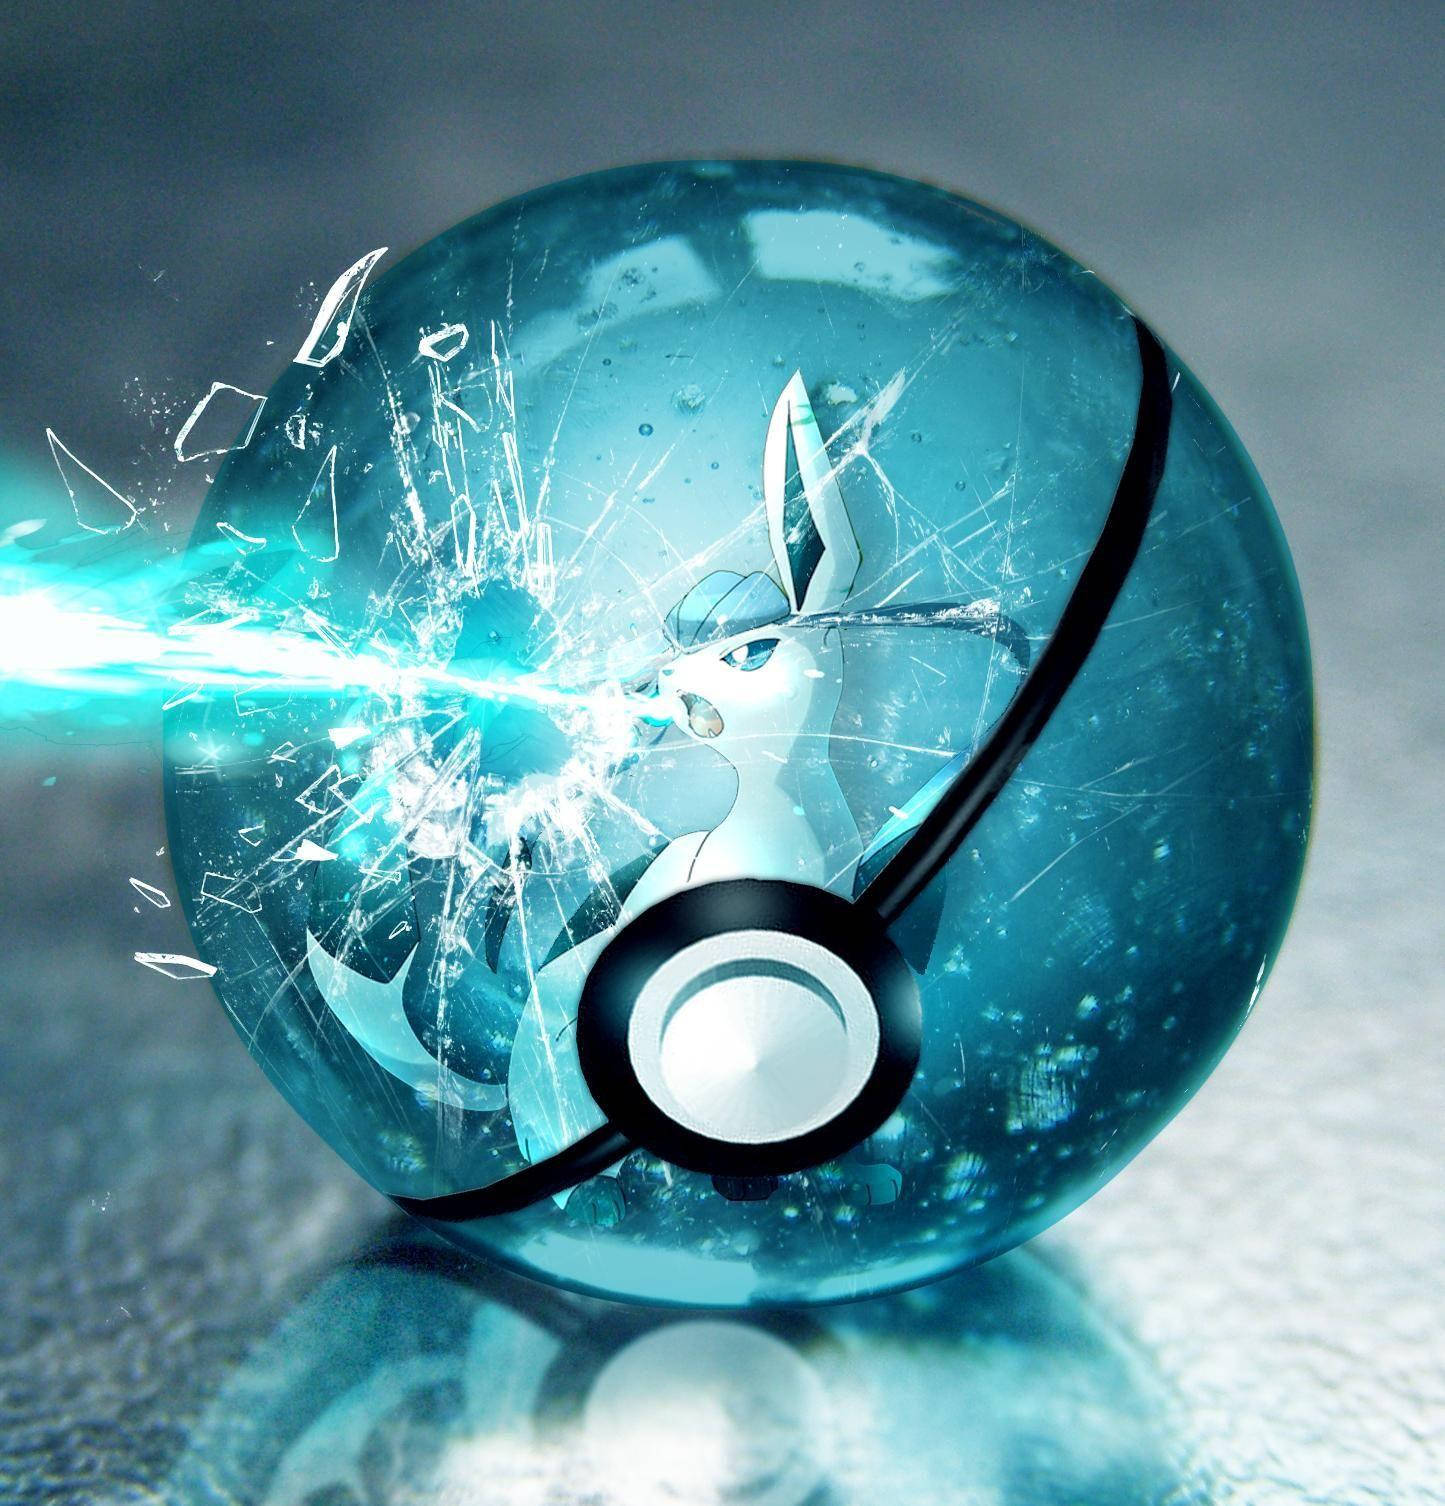 Glaceon Inside Pokeball